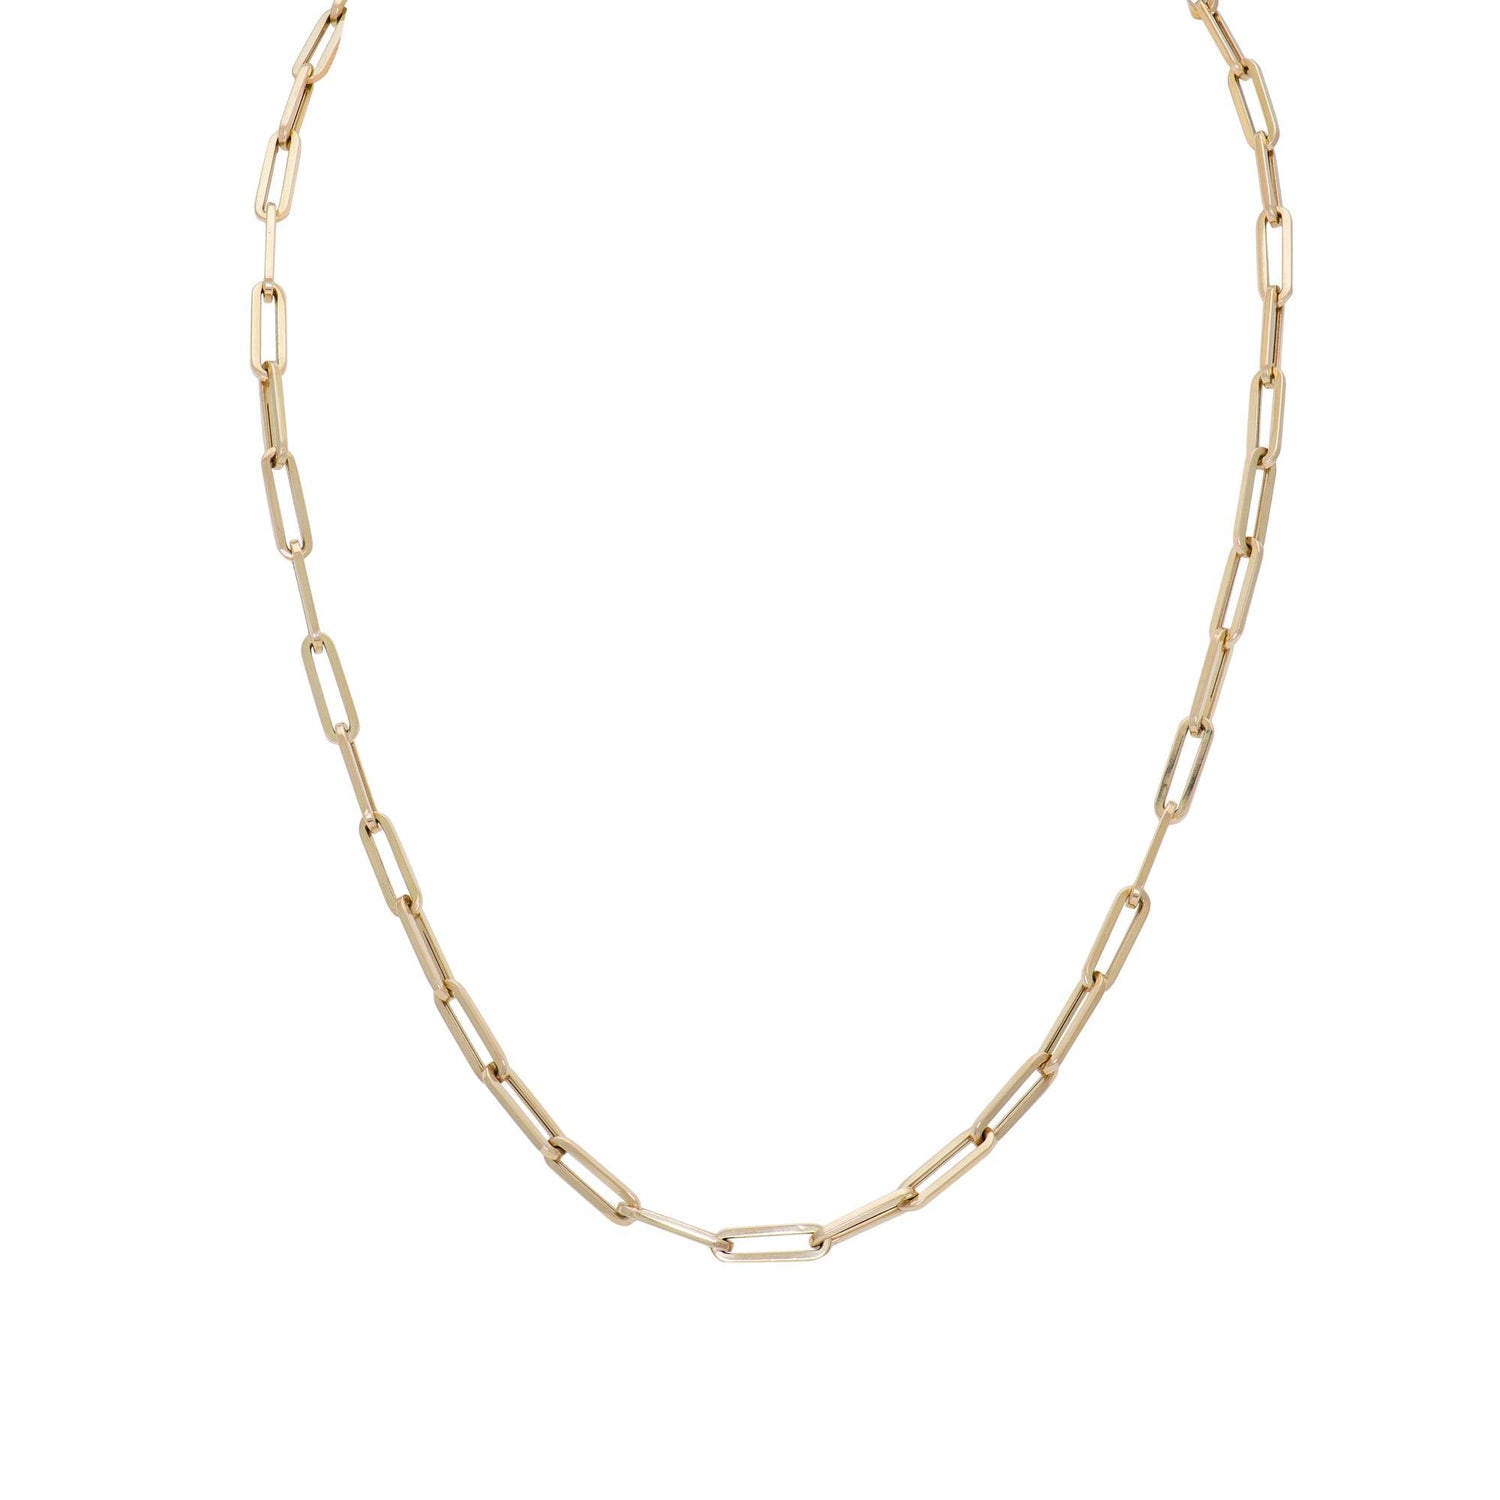 Buy Ayesha Set of 2 Gold-Toned Circular Chunky Chain Link Necklace &  Hammered Hoop Earrings Online